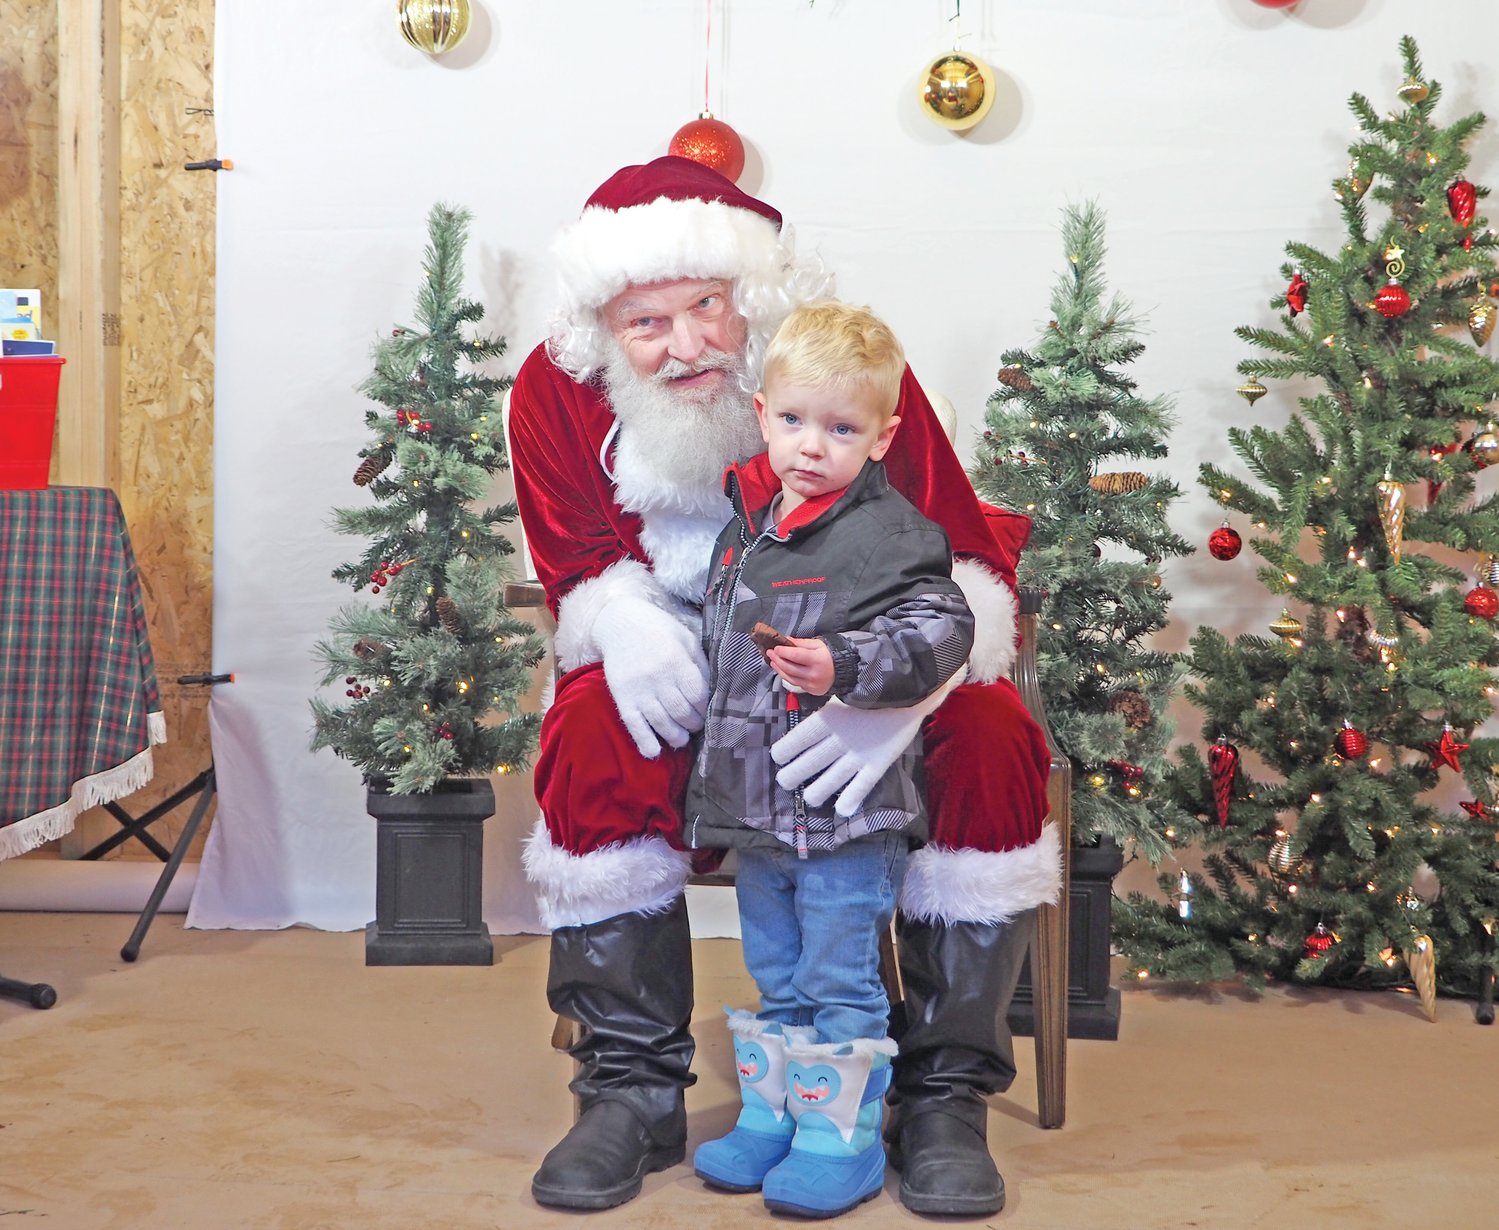 A cookie in hand and attention from Santa – a perfect Saturday afternoon.